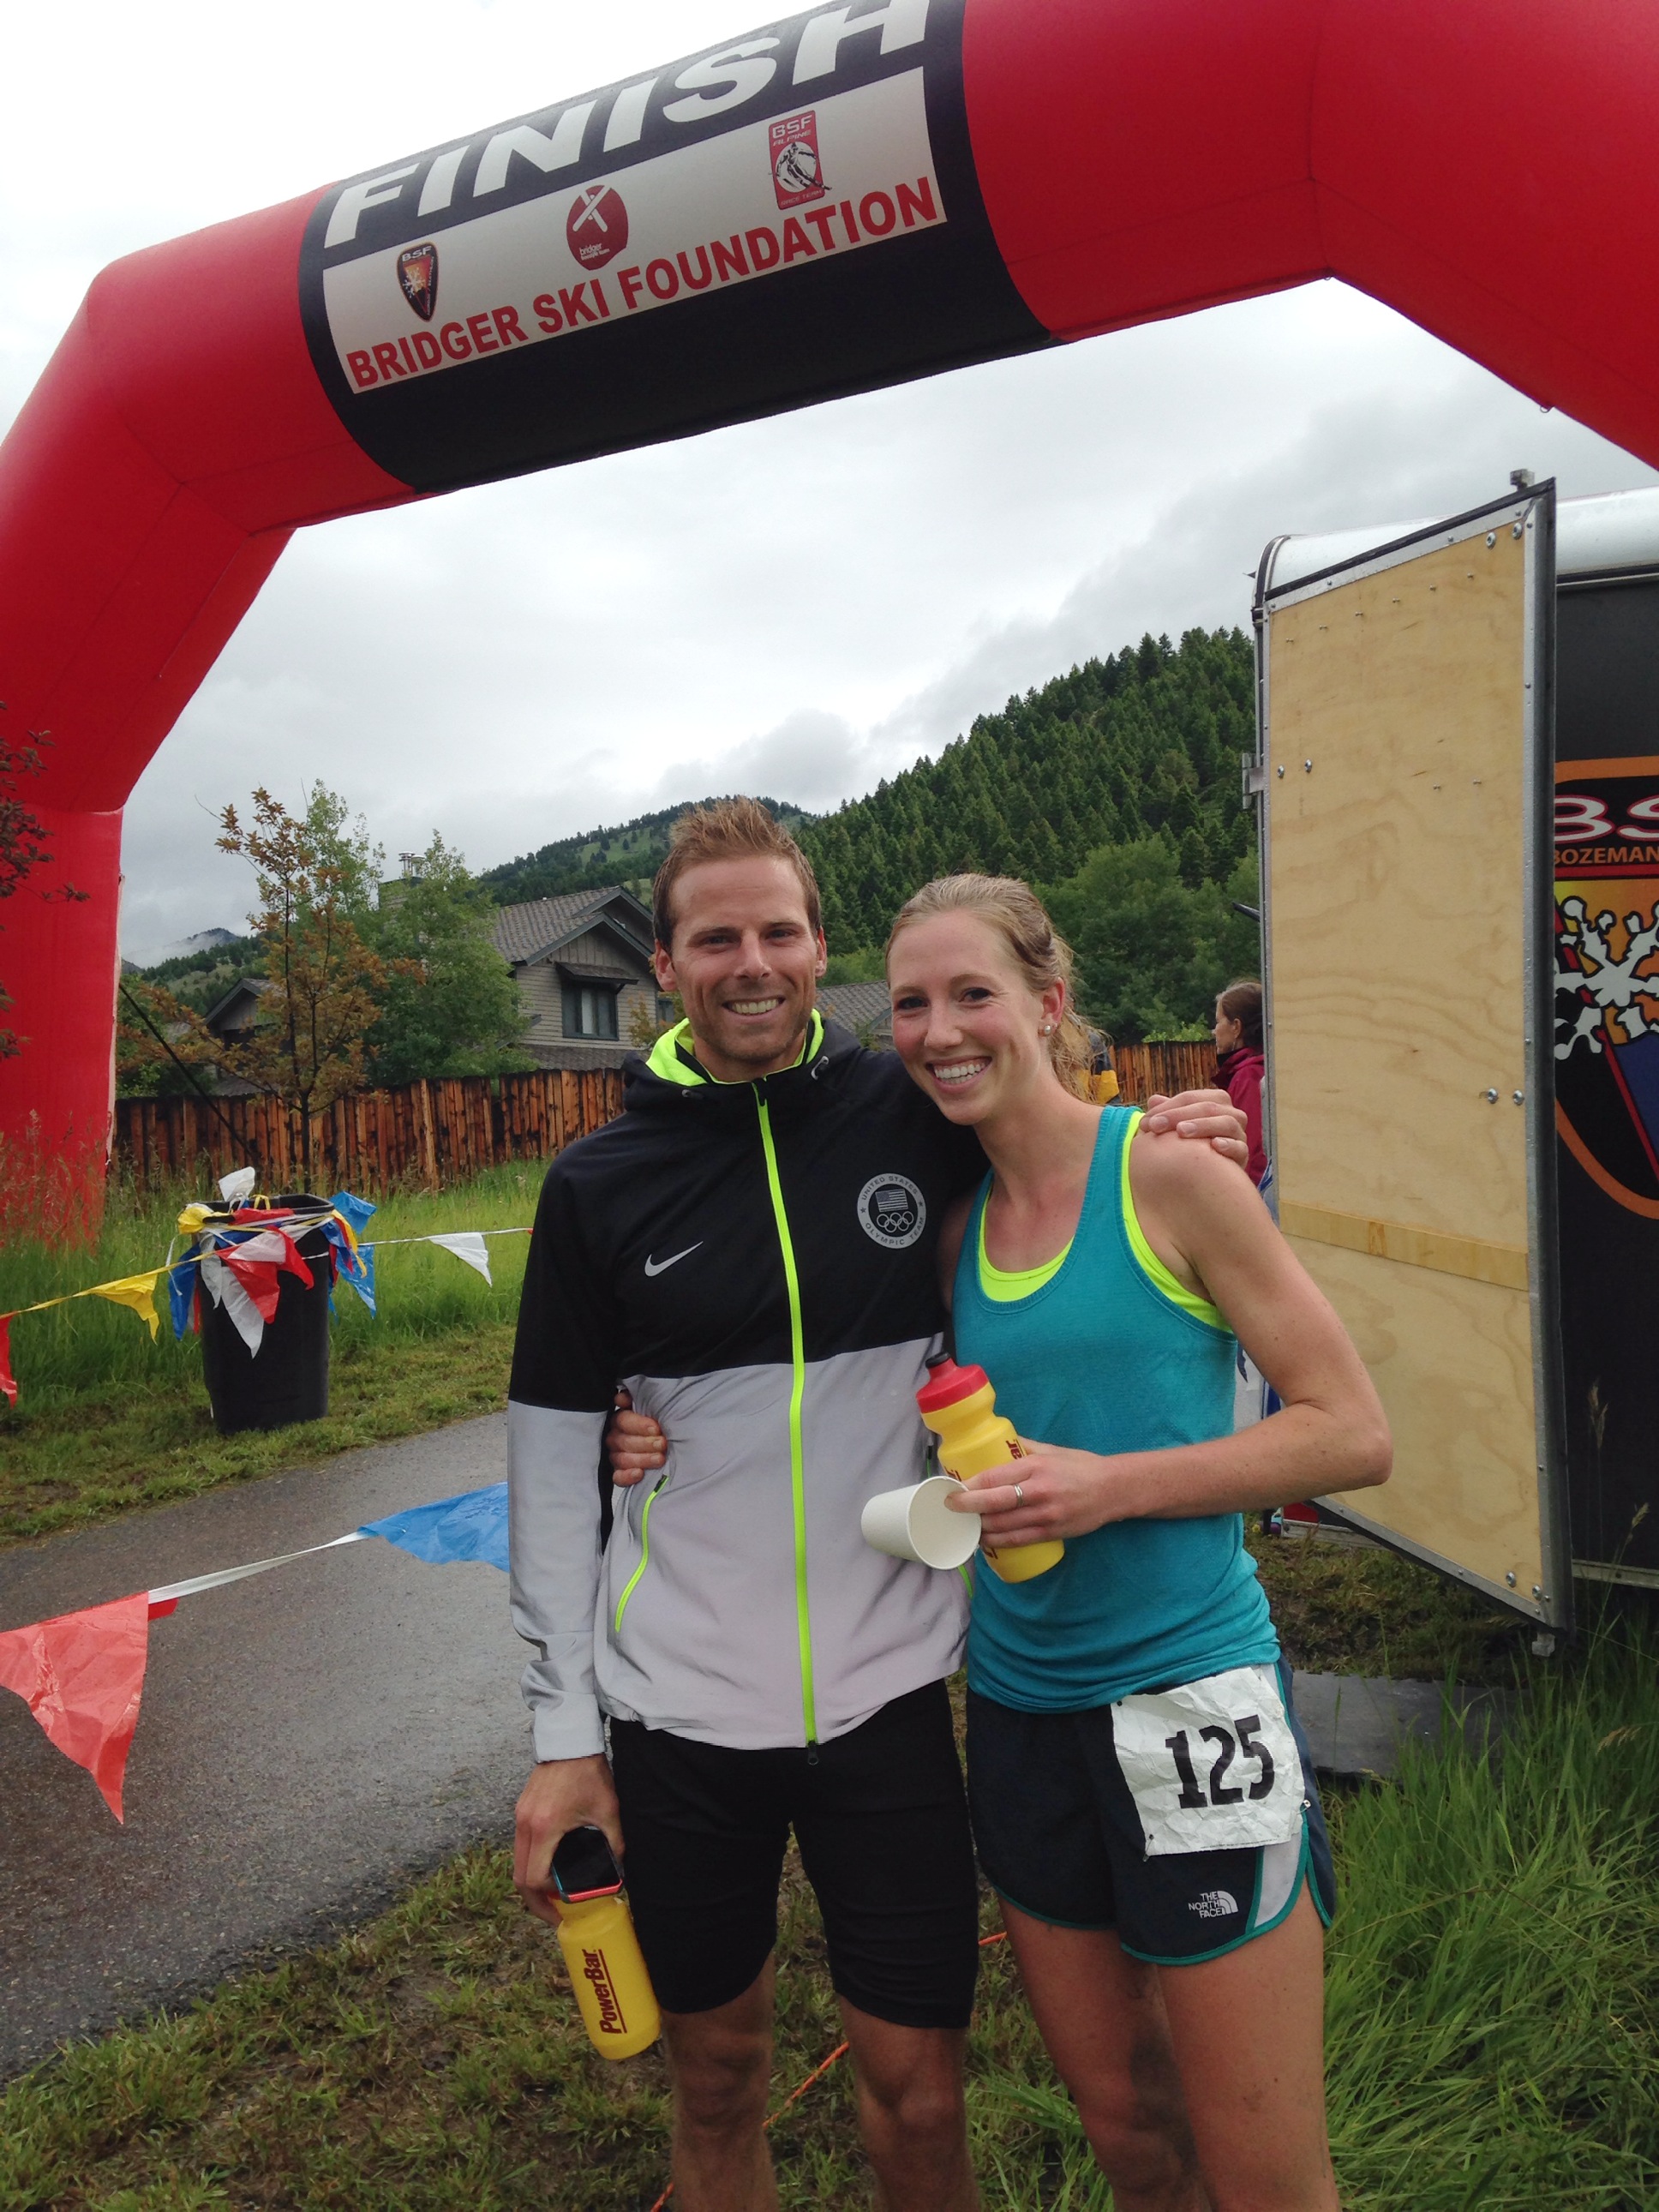 Andy Newell and Erika Flowers, both of the Stratton Mountain T2 Elite Team, pose after both won the Jim Bridger Trail Run in Bozeman, Mont. for their respective genders.